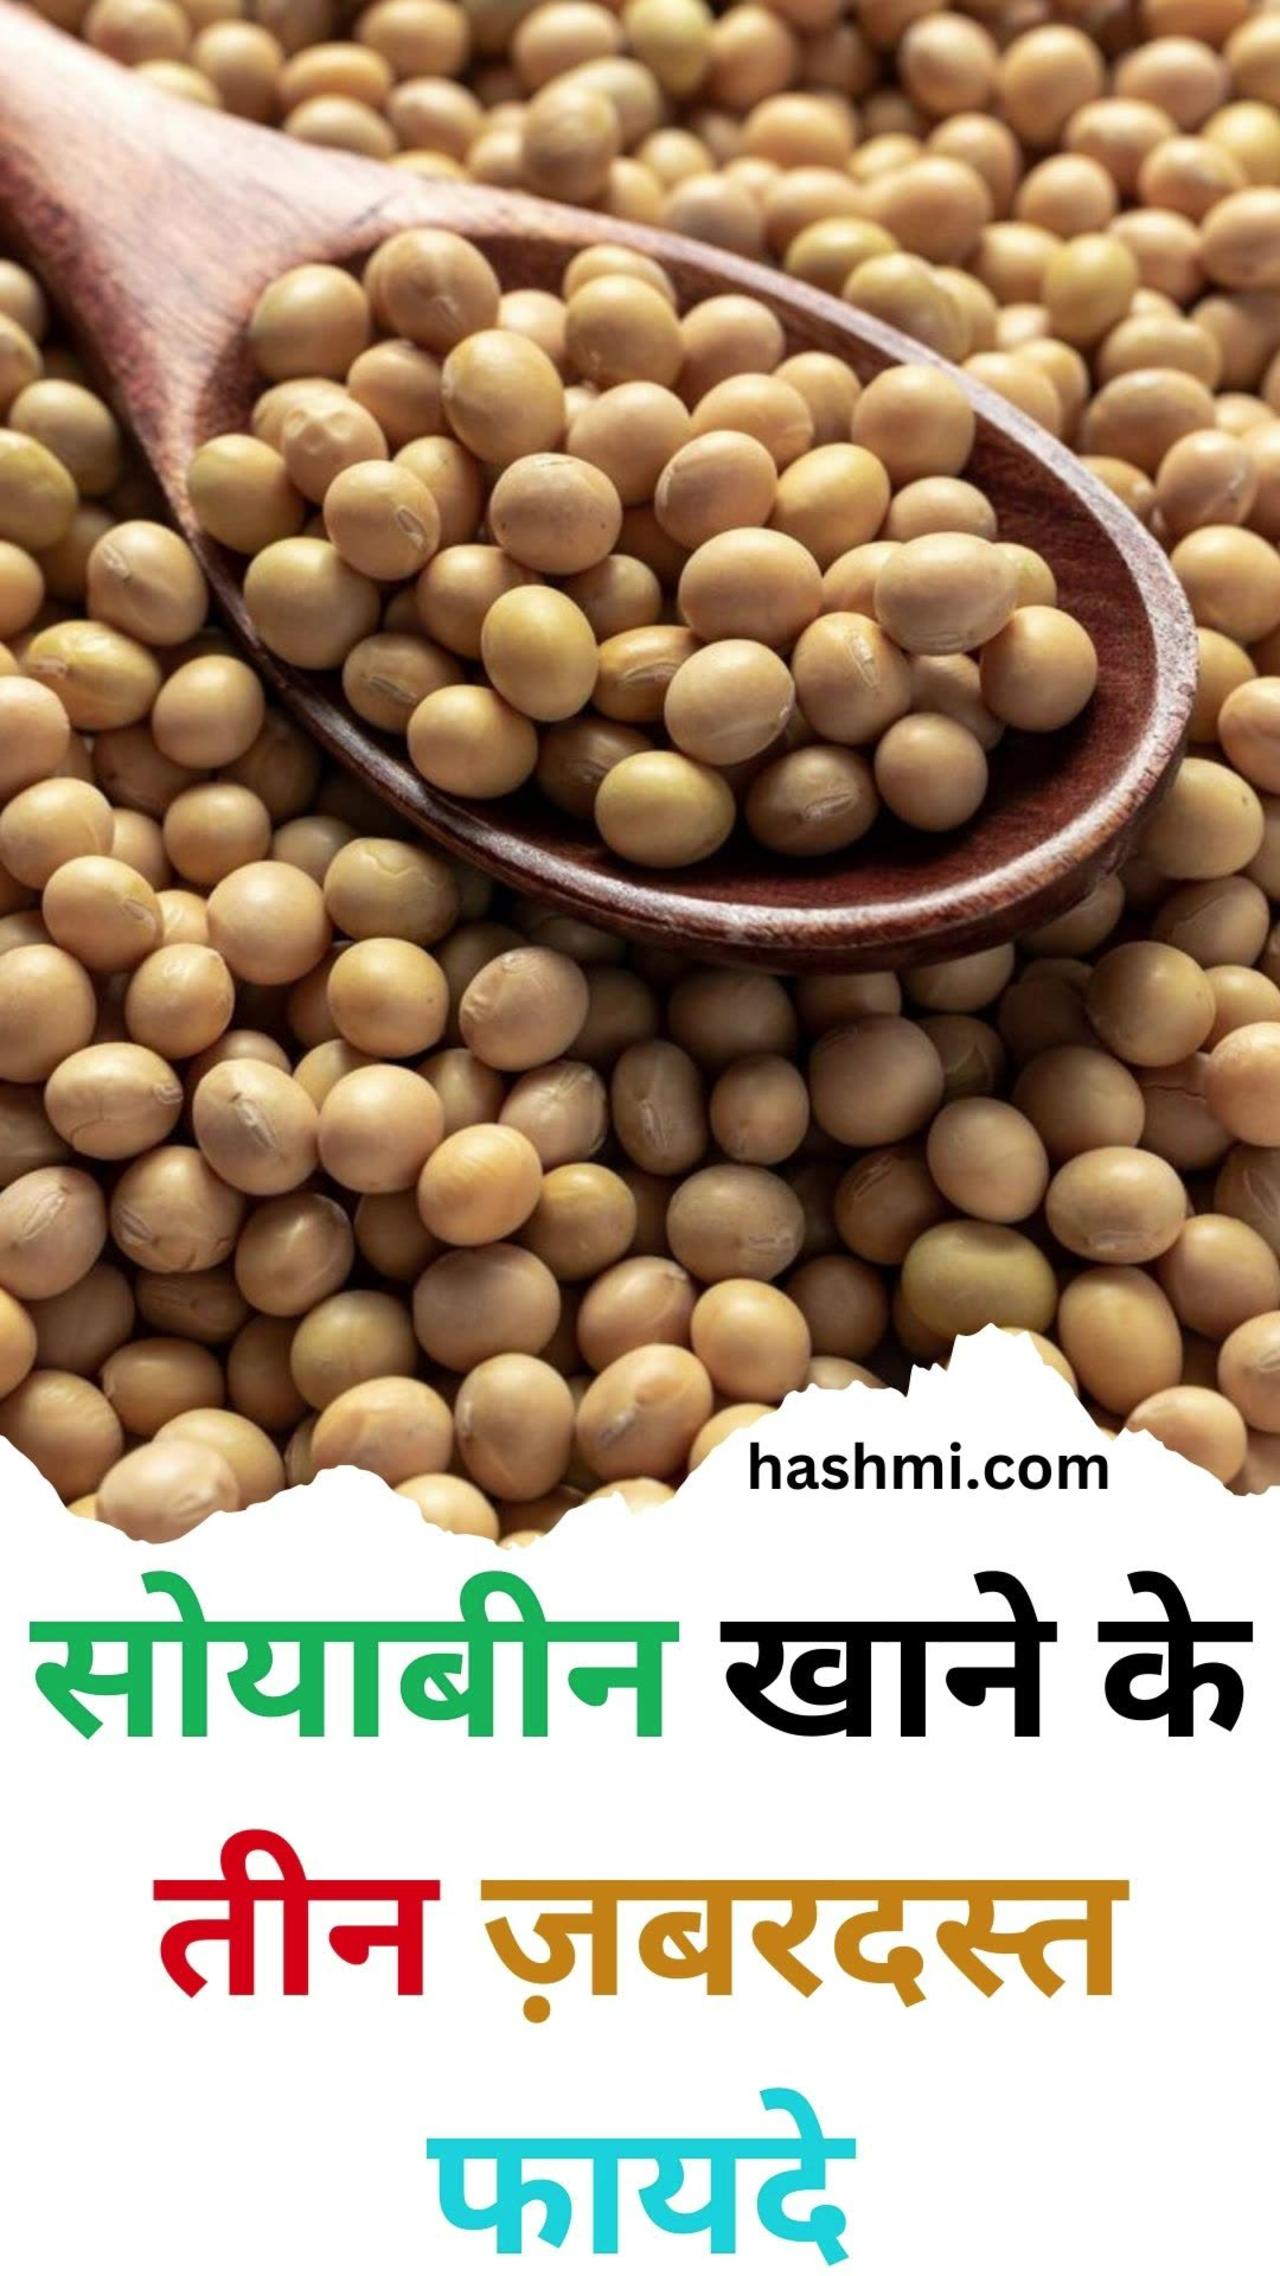 Three tremendous benefits of eating soybean